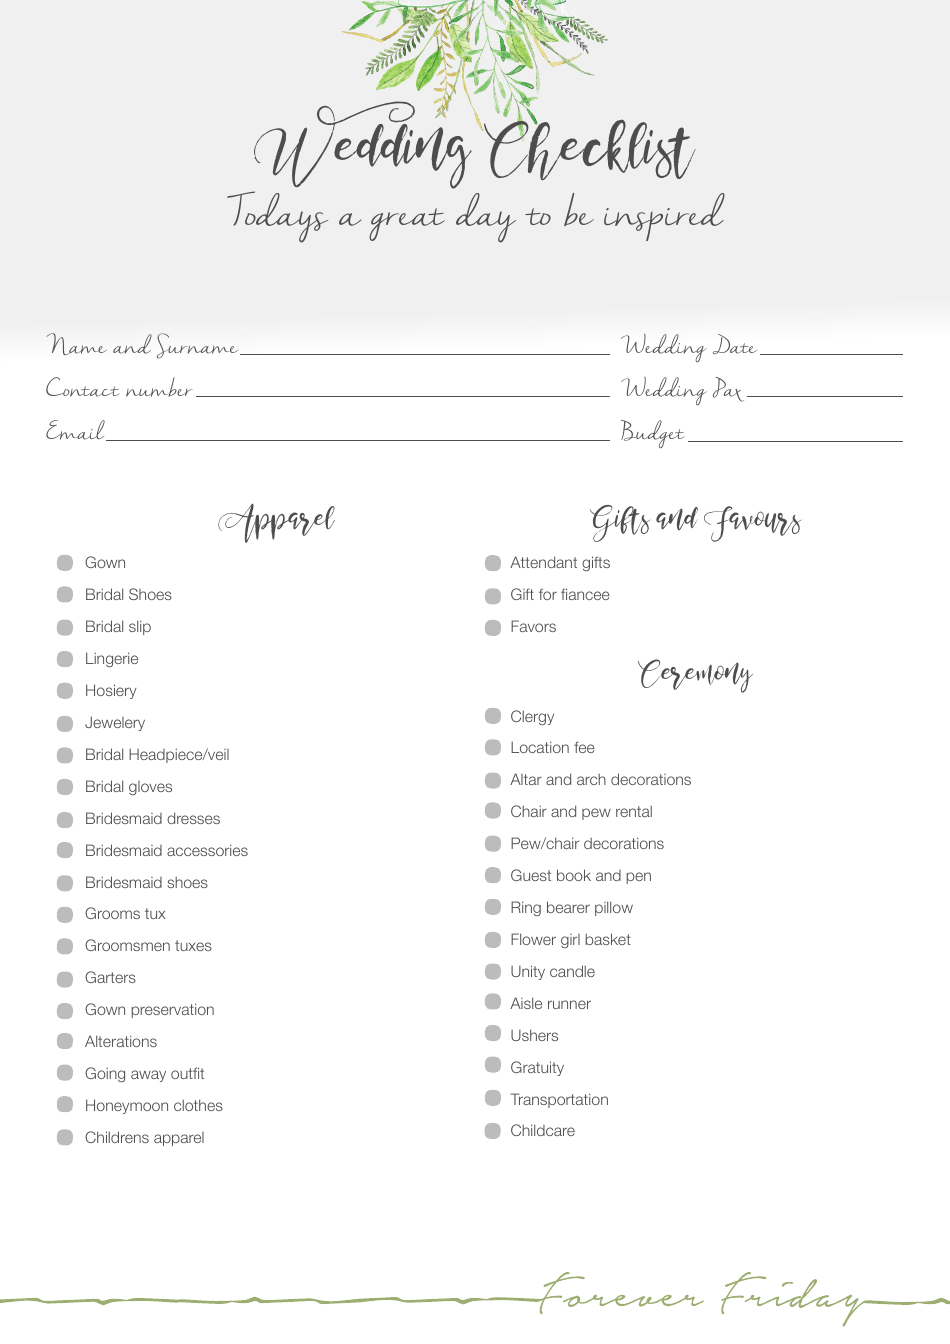 Wedding Day Checklist Template - Forever Friday, Page 1